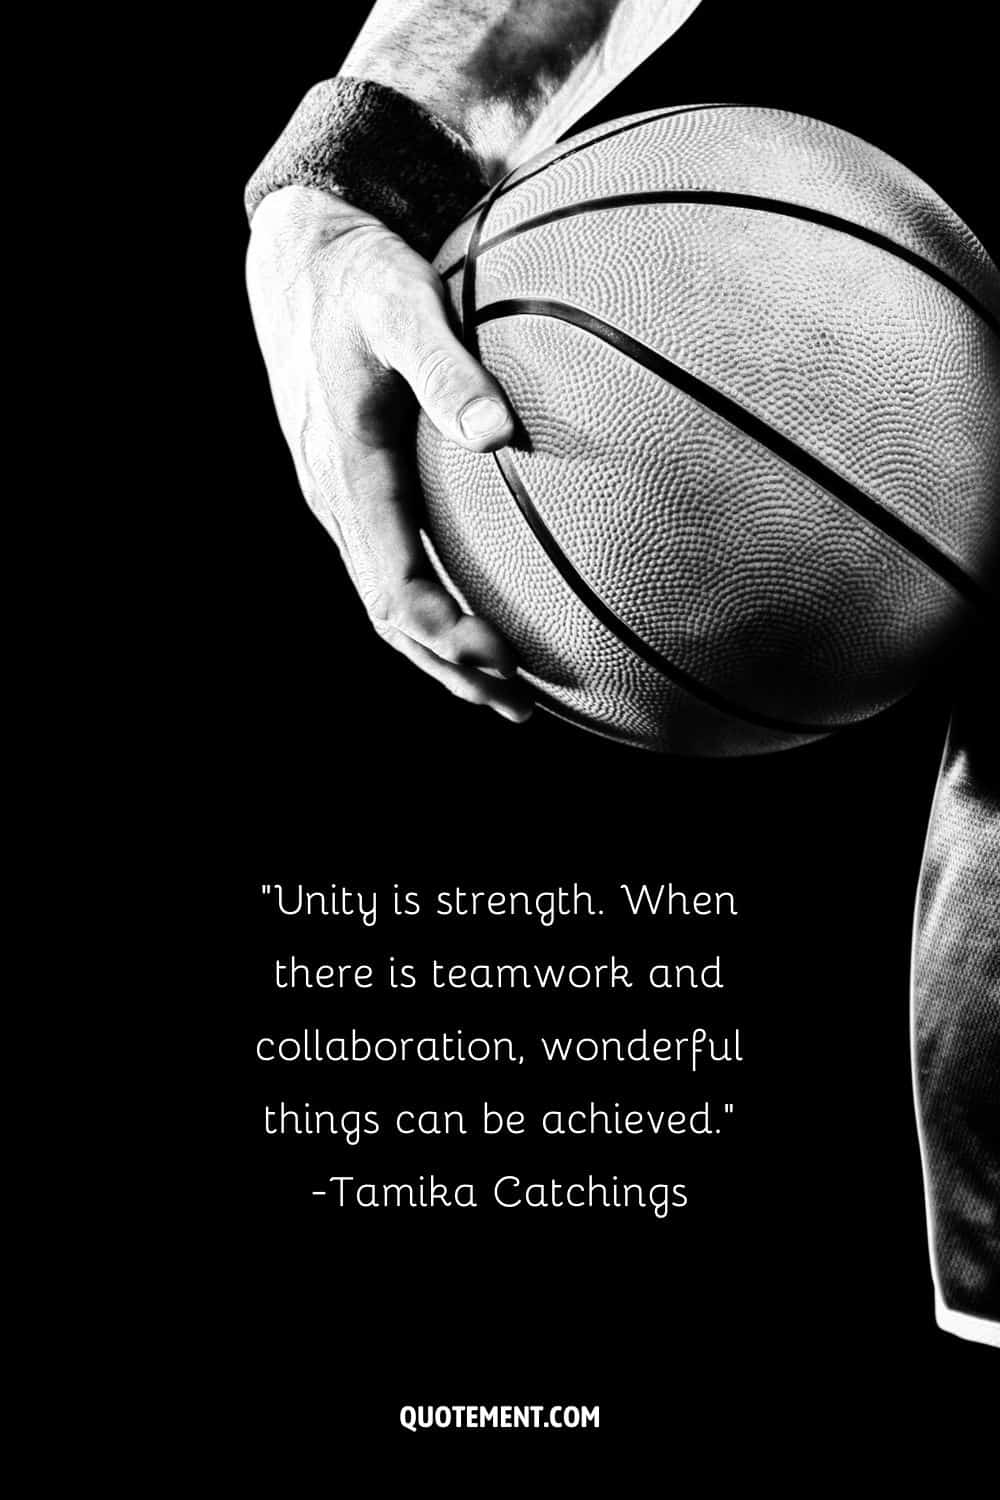 Unity is strength. When there is teamwork and collaboration, wonderful things can be achieved.